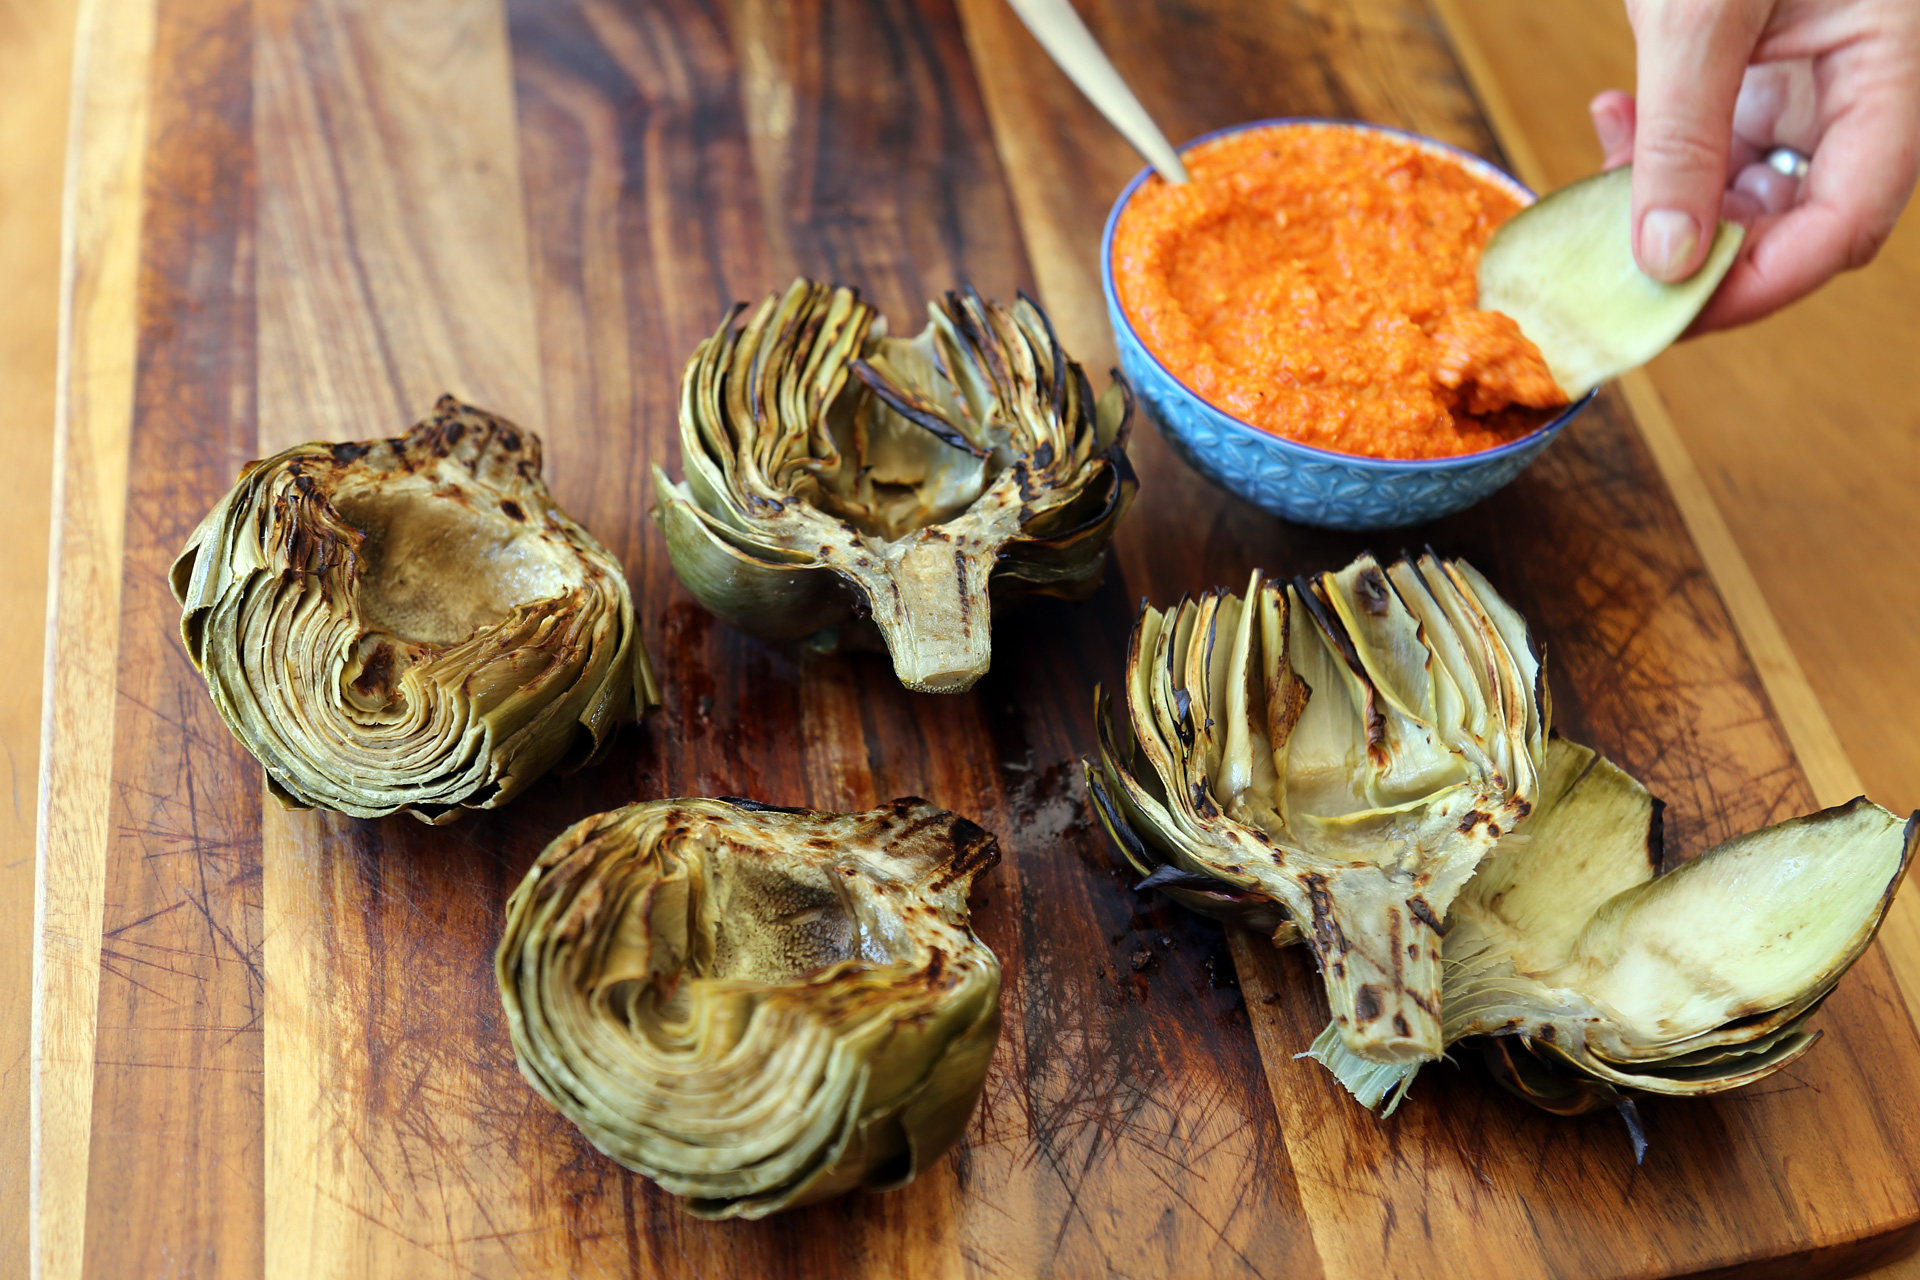 Grilled Artichokes with Romesco Sauce